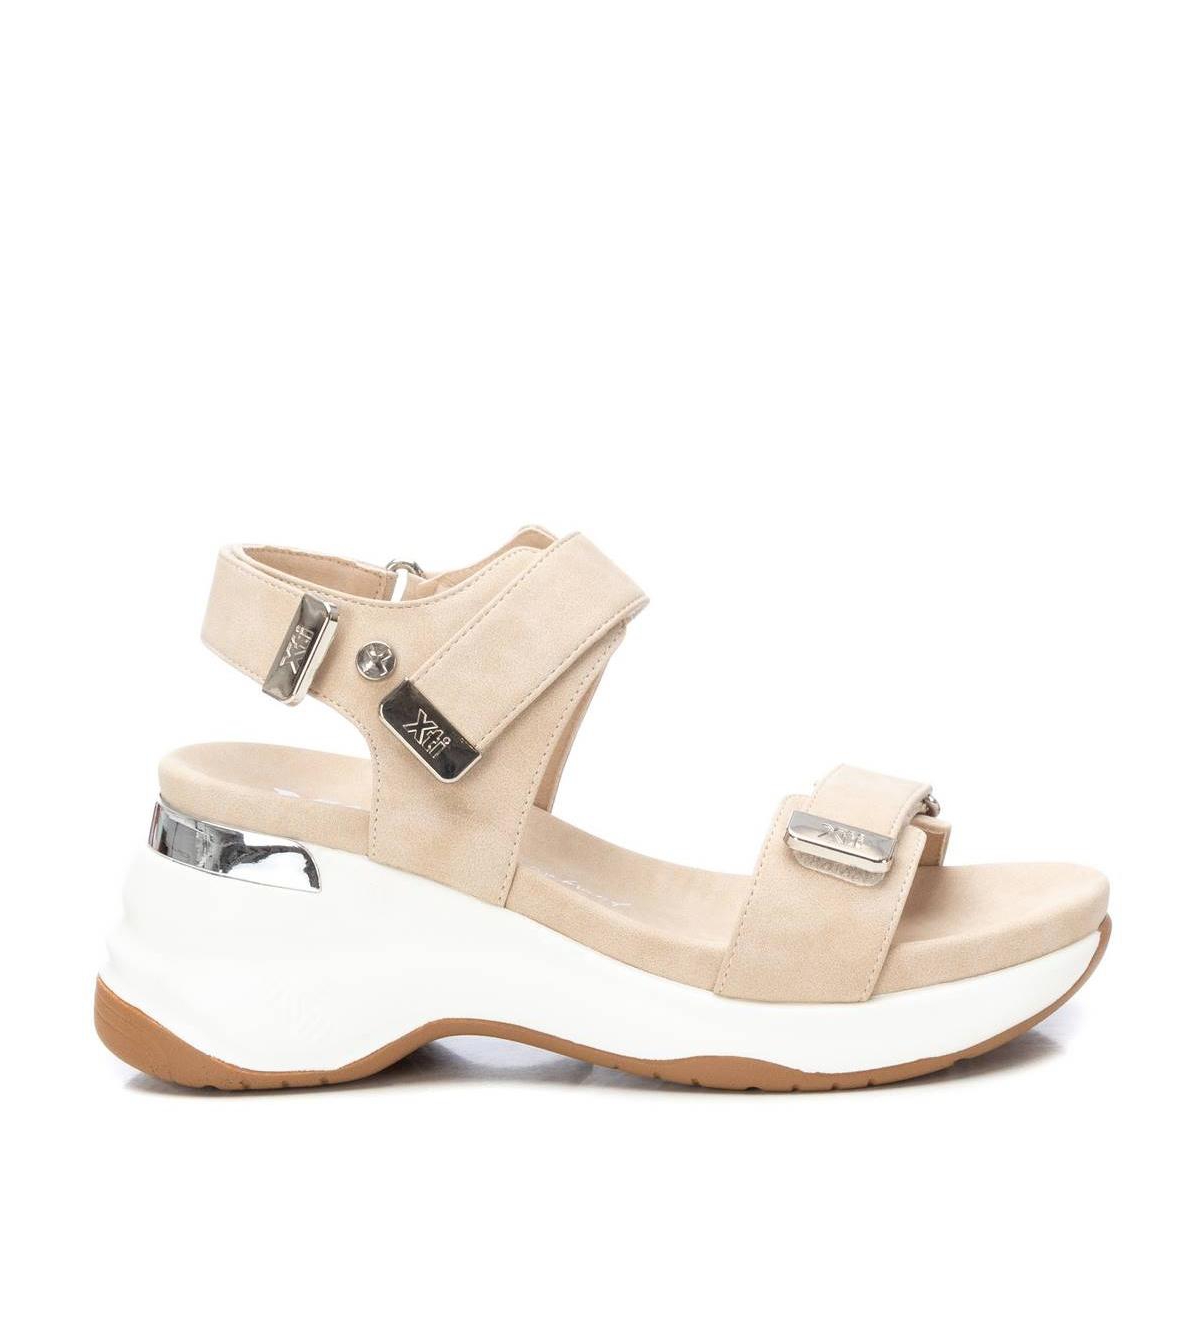 Women's Wedge Double Strap Sandals By - Black